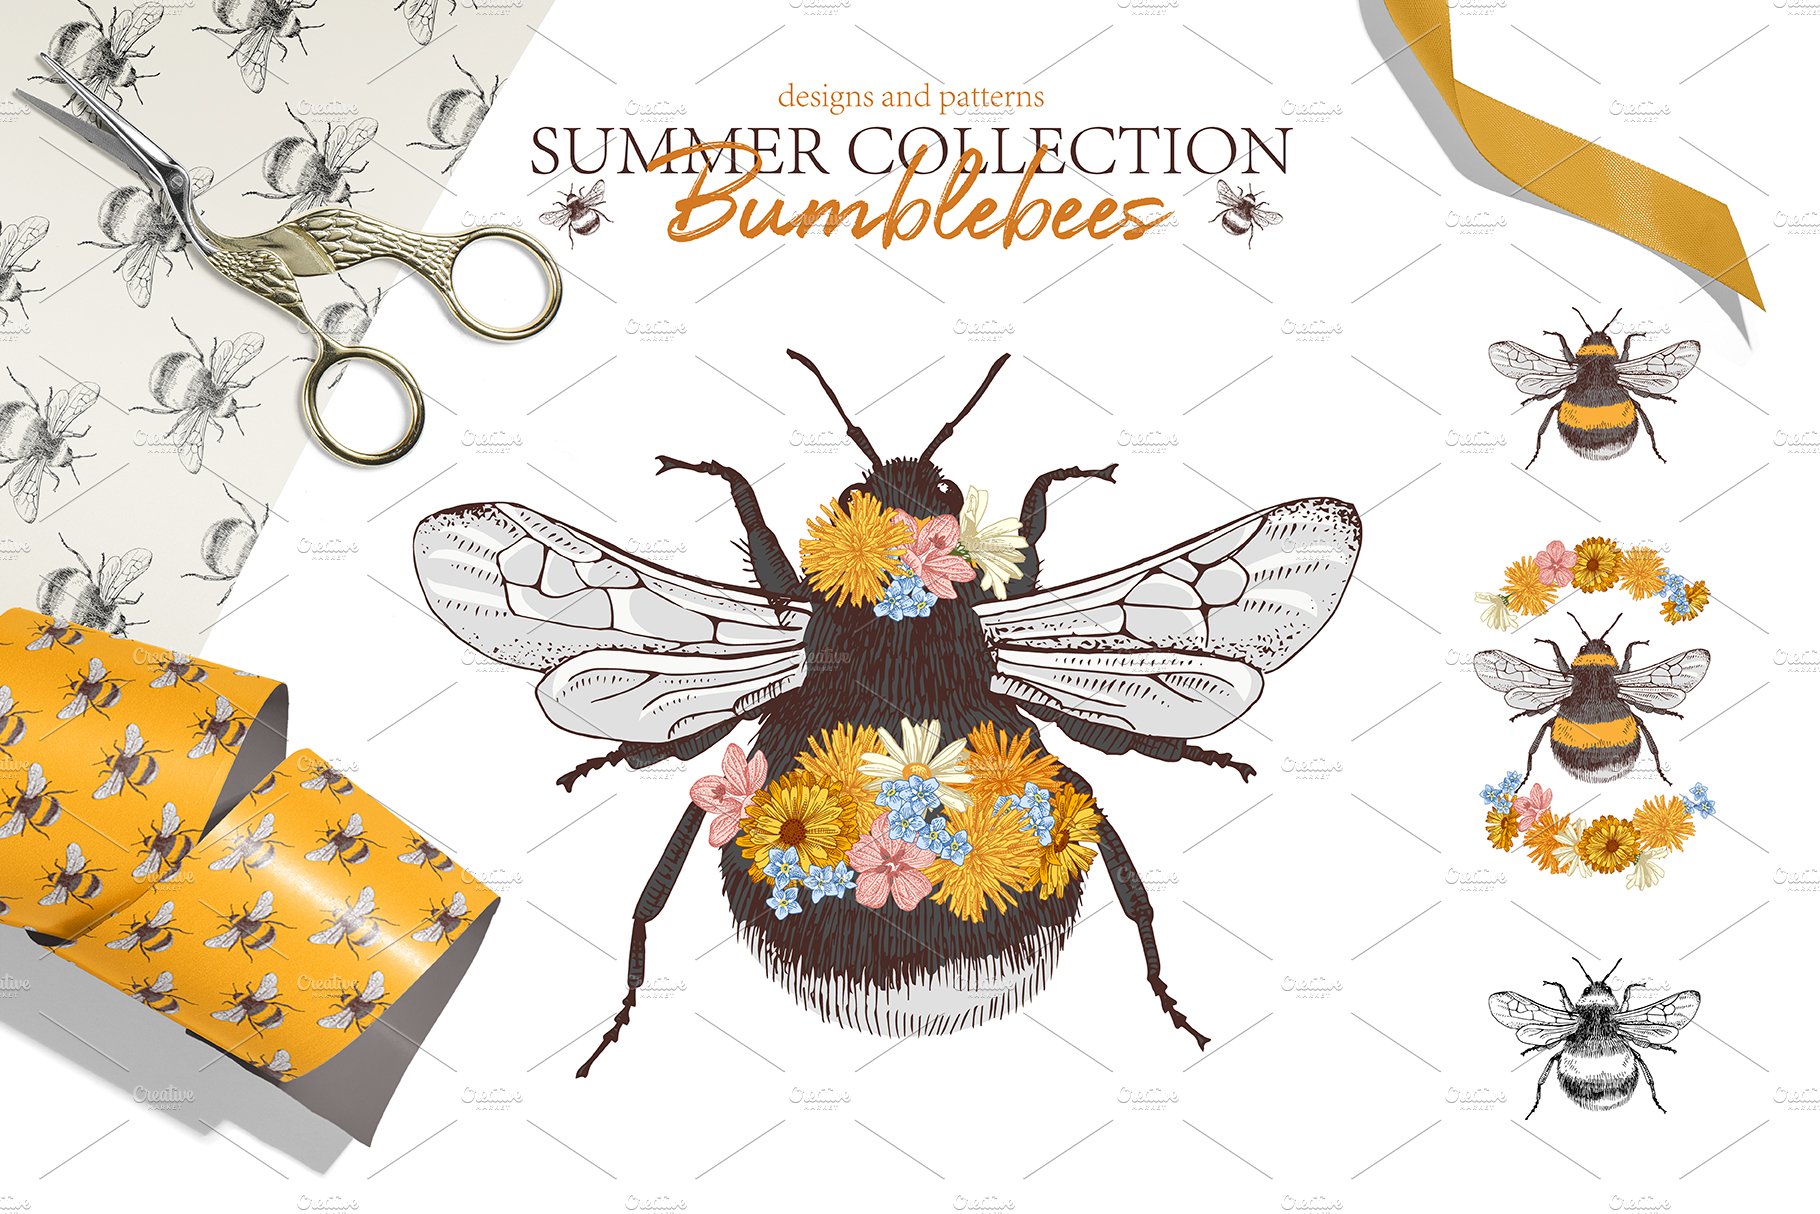 Designs and patterns with bumblebees cover image.